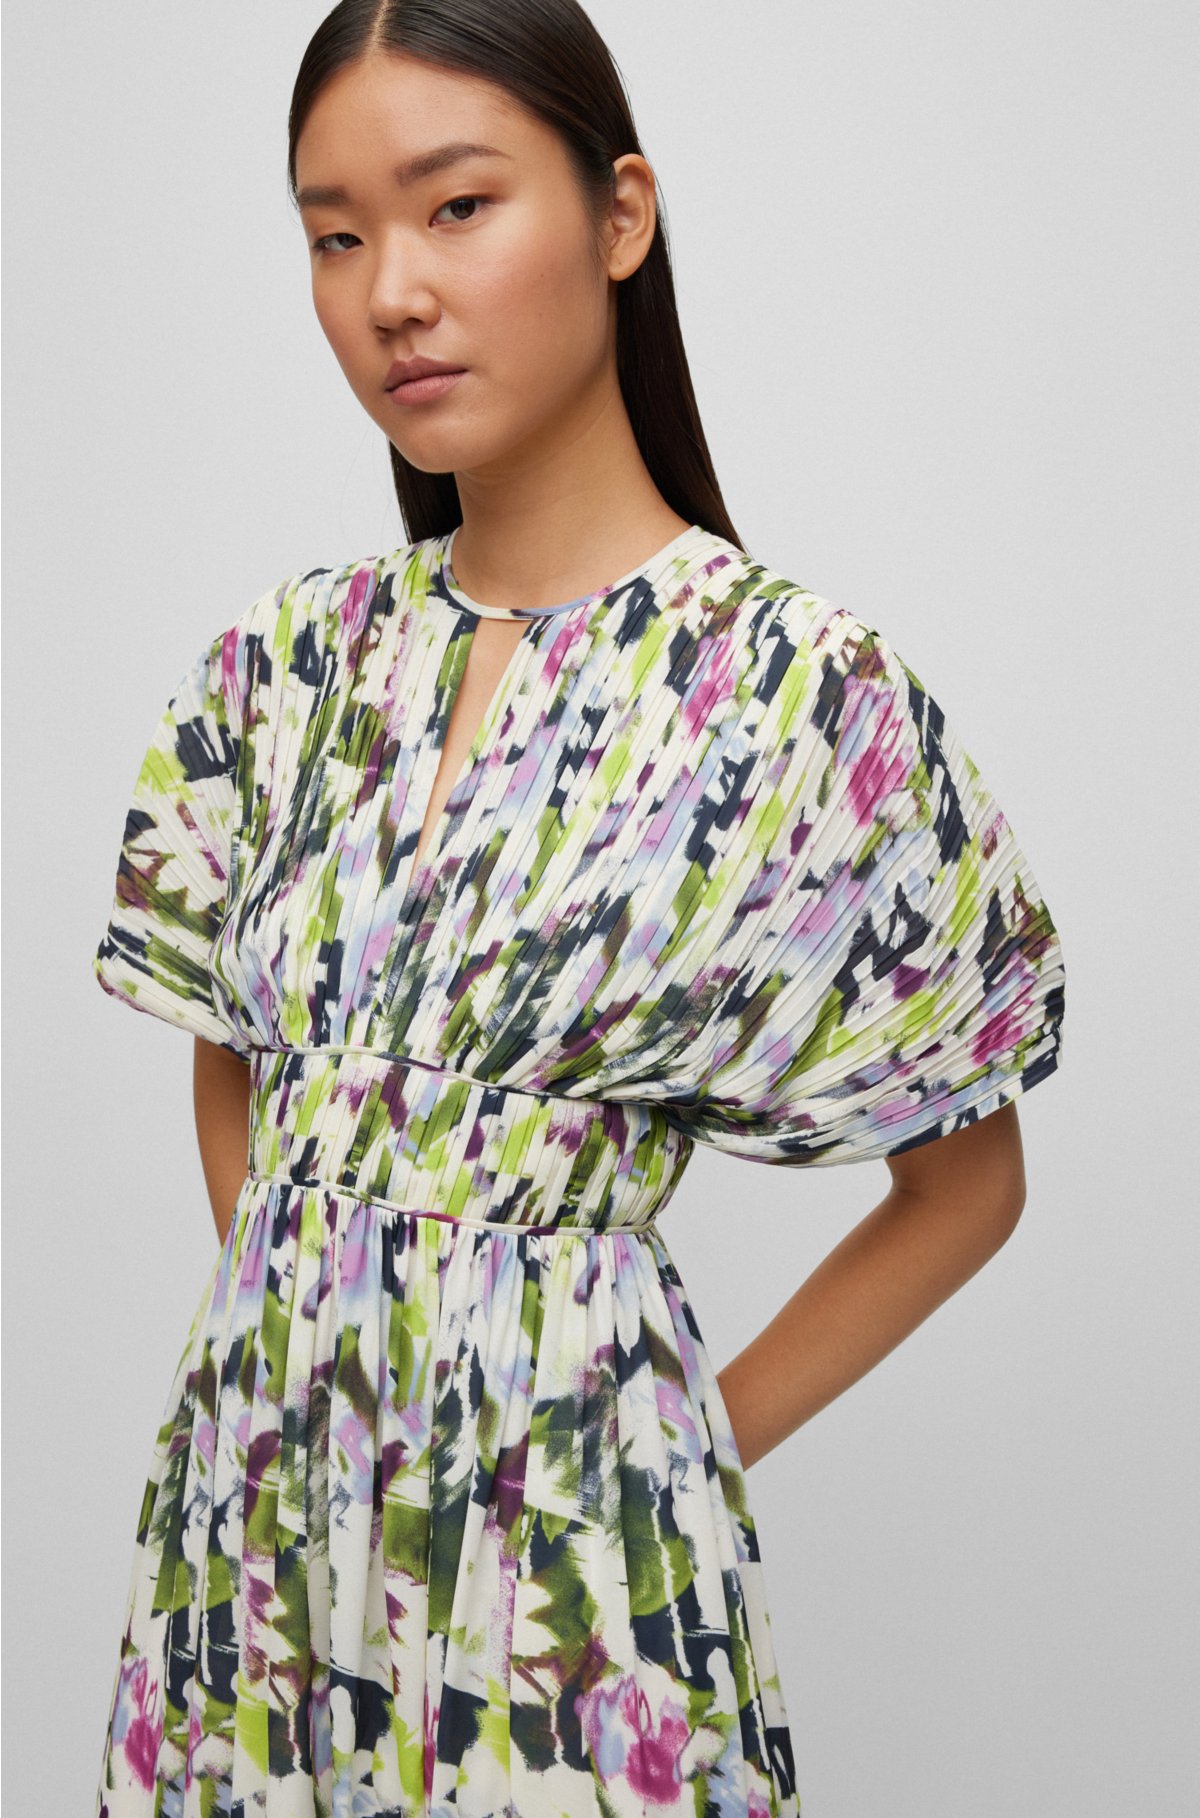 Short-sleeved dress with cut-out details, Patterned